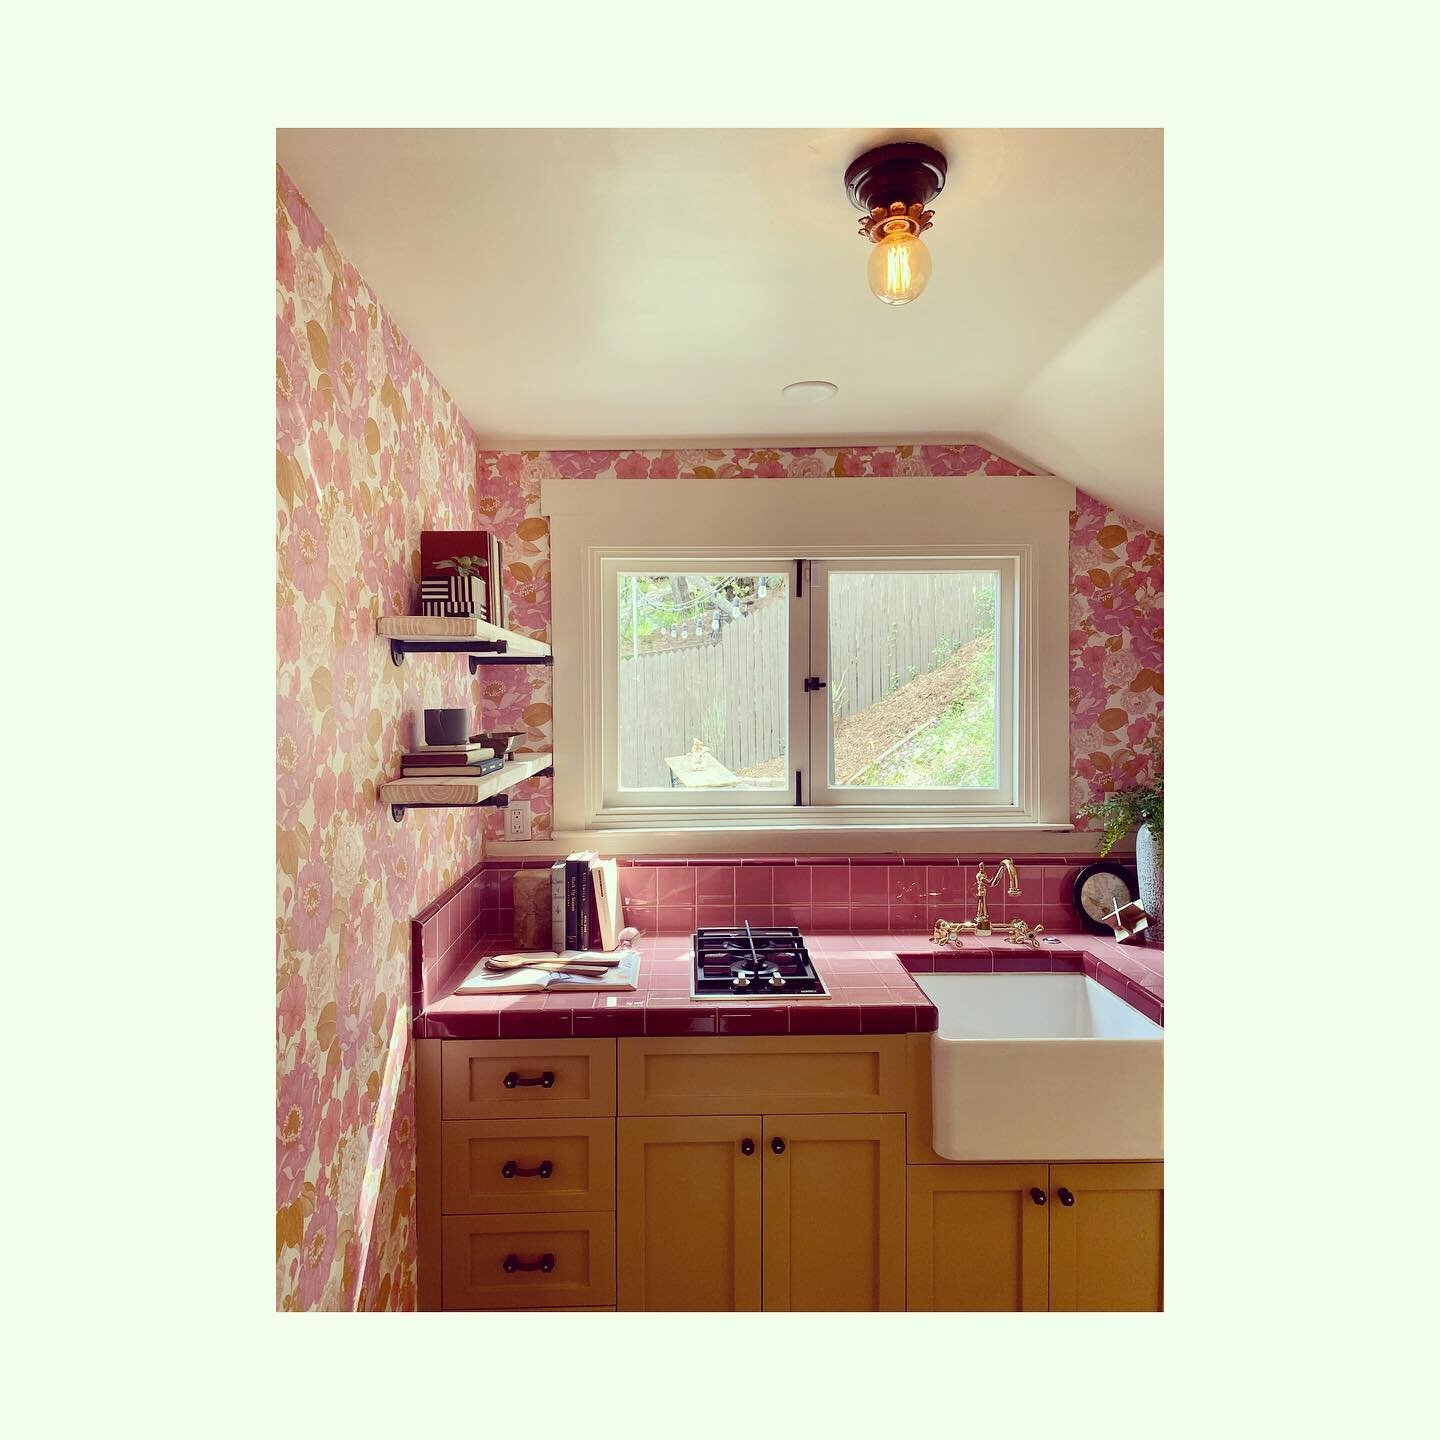 tbt to the sweetest retro kitchen we did a couple of years ago&hellip;pink, floral wallpaper for the win! 🌸  #minthomedecordesign  #smallkitchen #wallpaper #retrokitchen #pinkkitchen #cottagecore #interiordesign #interiordesignerla #interiors